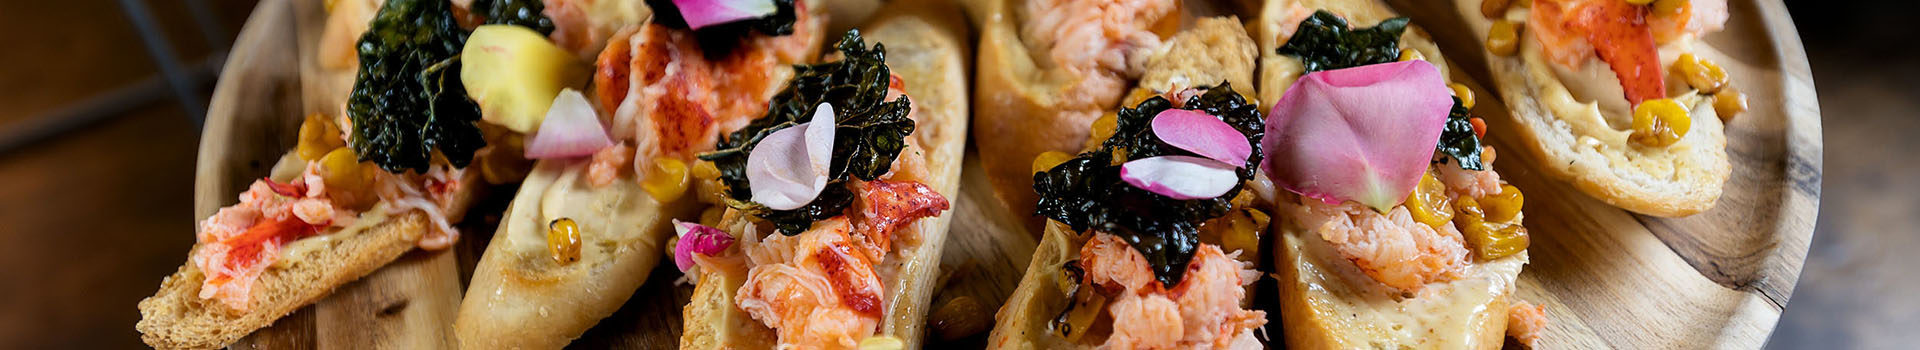 Slices of toast topped with lobster, topped with a crispy kale chip and flower petals. They sit on a wooden plate.